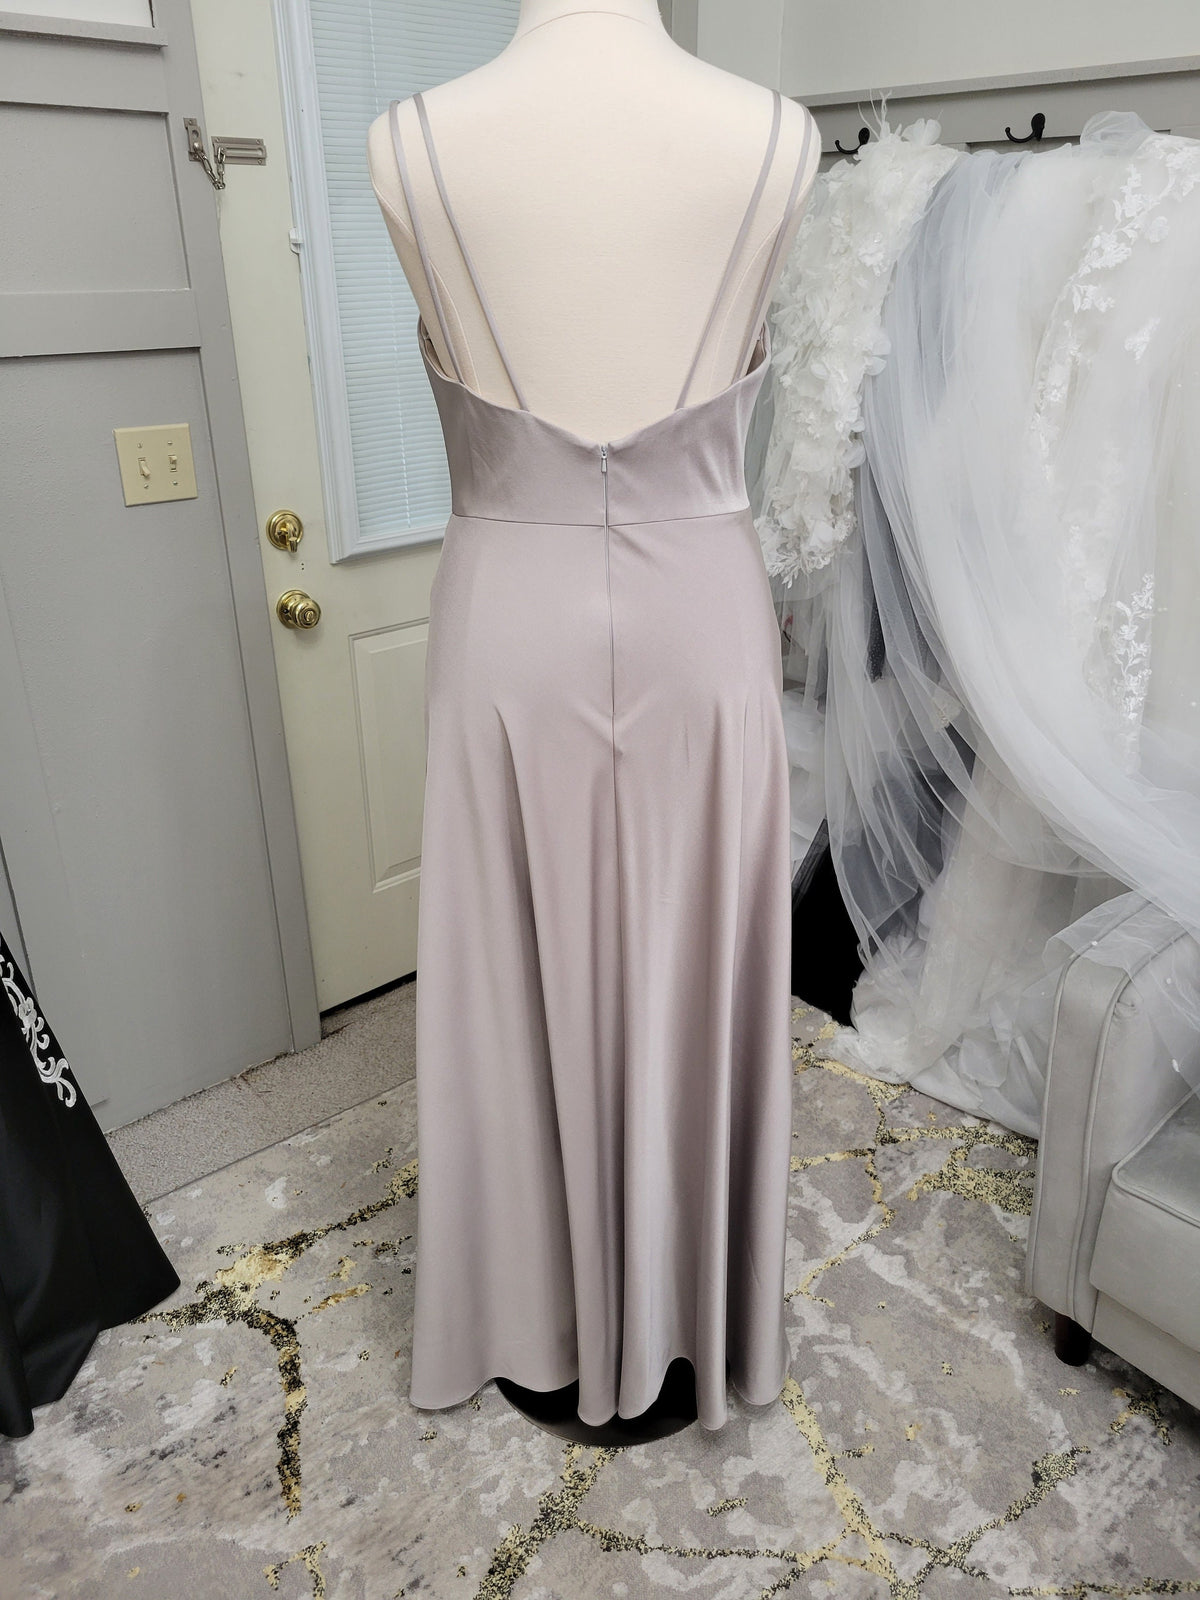 Simple Silver Gray Grey Sleeveless With Straps High Neckline Comfy Aline Formal Gown Slip Style Open Back Bridal Party Wedding Guest Floor